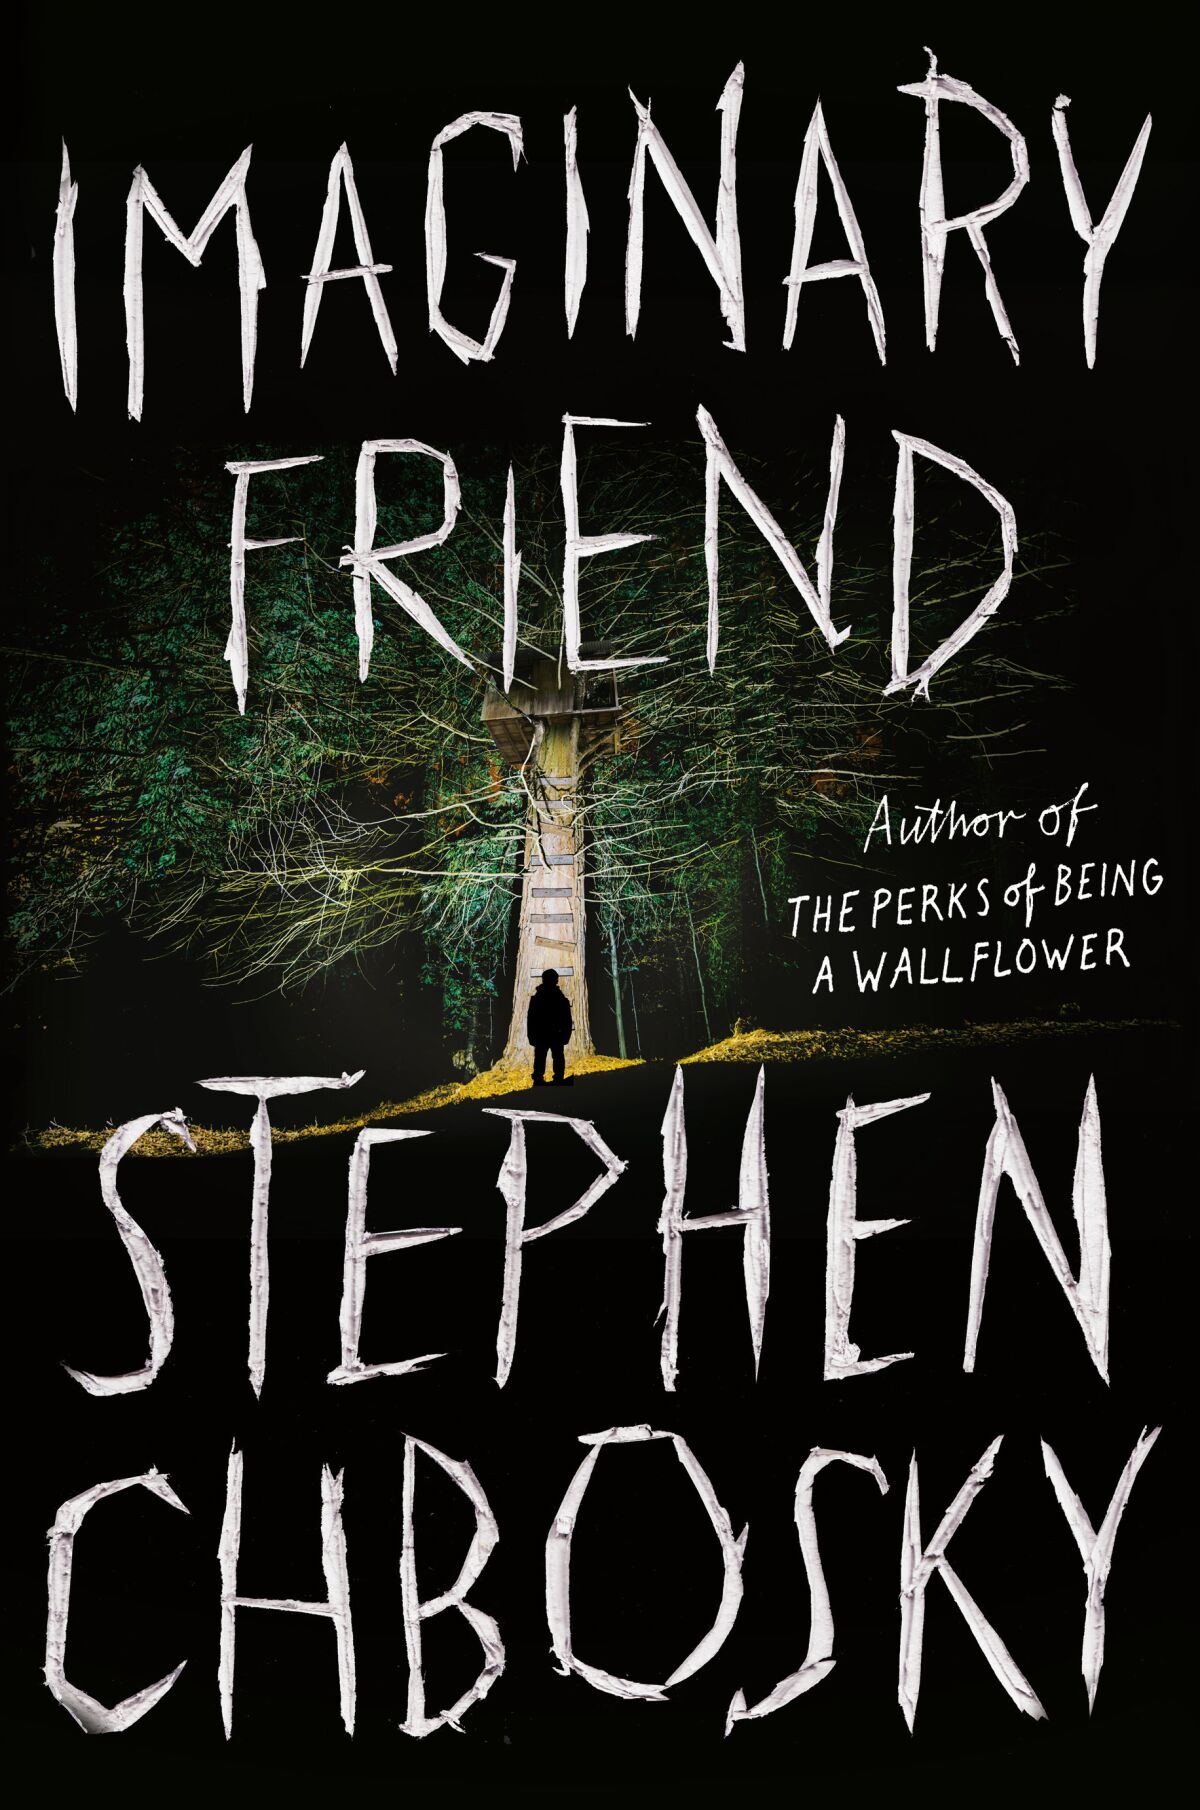 A book jacket of Stephen Chbosky's "Imaginary Friend."